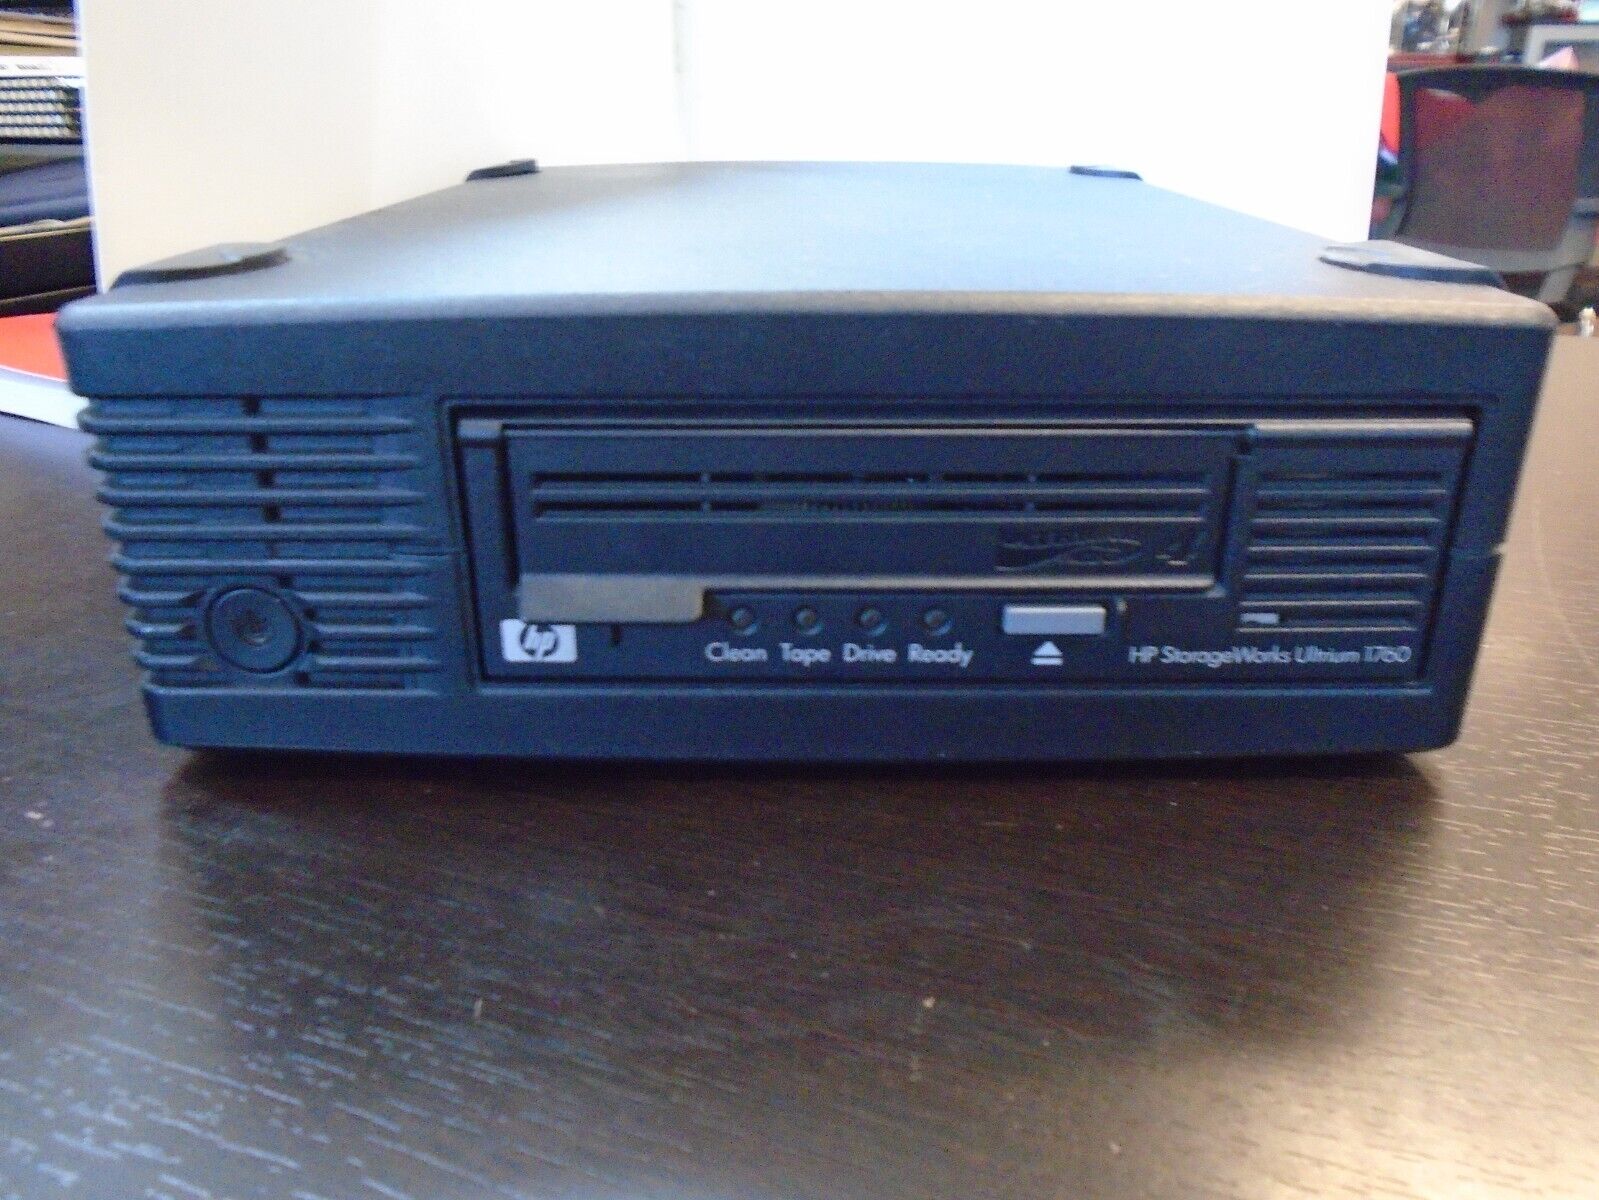 HP StorageWorks LTO-4 ultrium 1760 SAS external tape drive EH922A Parts Only